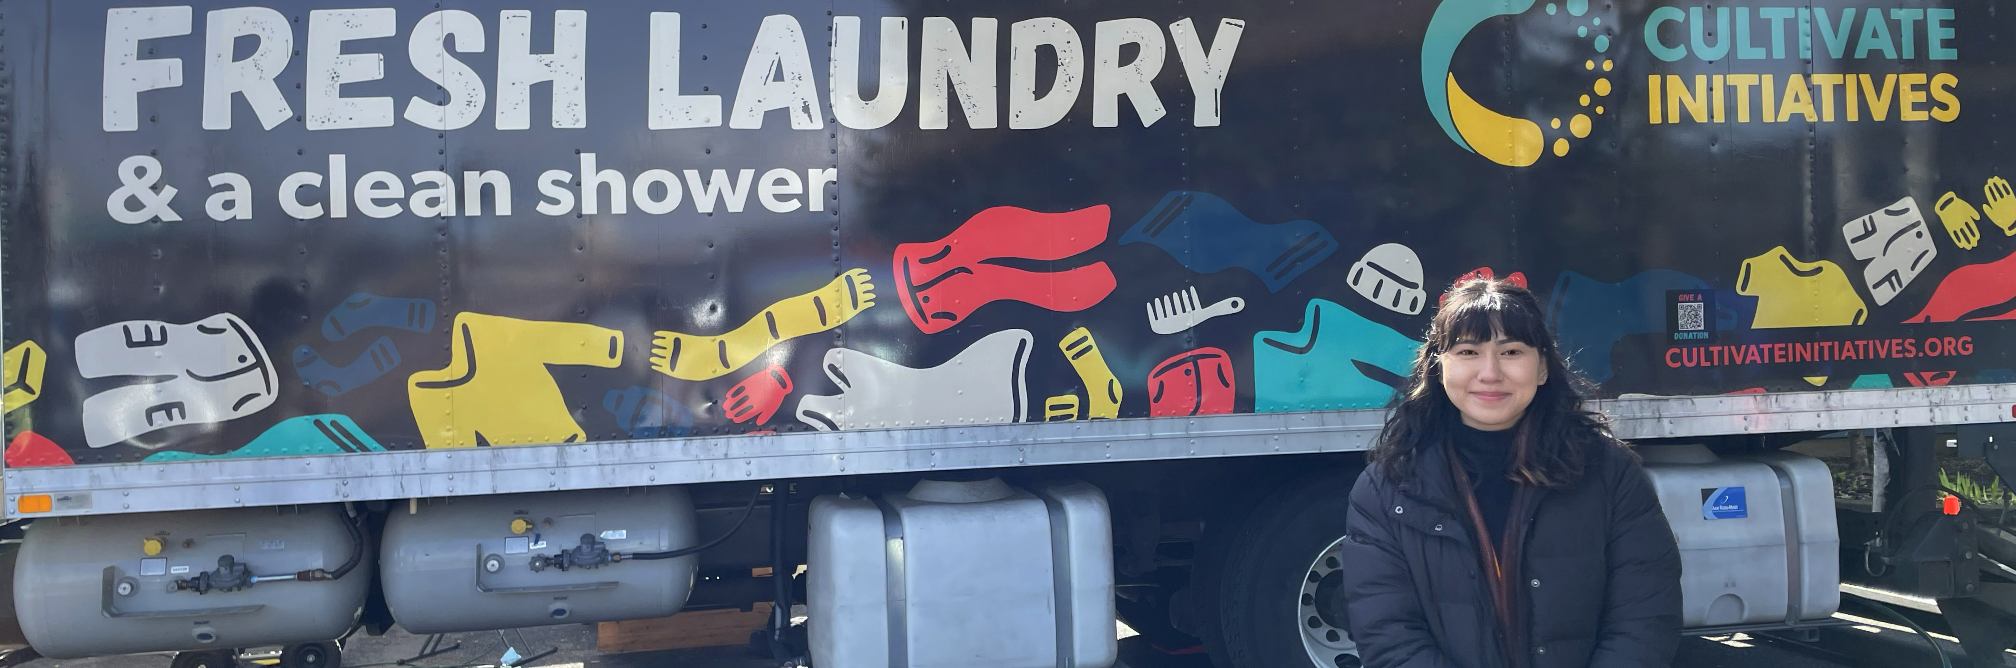 The side of a semi-truck-sized mobile shower unit is covered with cartoons of clothing, the large words, Fresh Laundry and a clean shower and the logo for Cultivate Initiatives. In front stands a female CareOregon employee who hands out hygiene kits to people using the service.